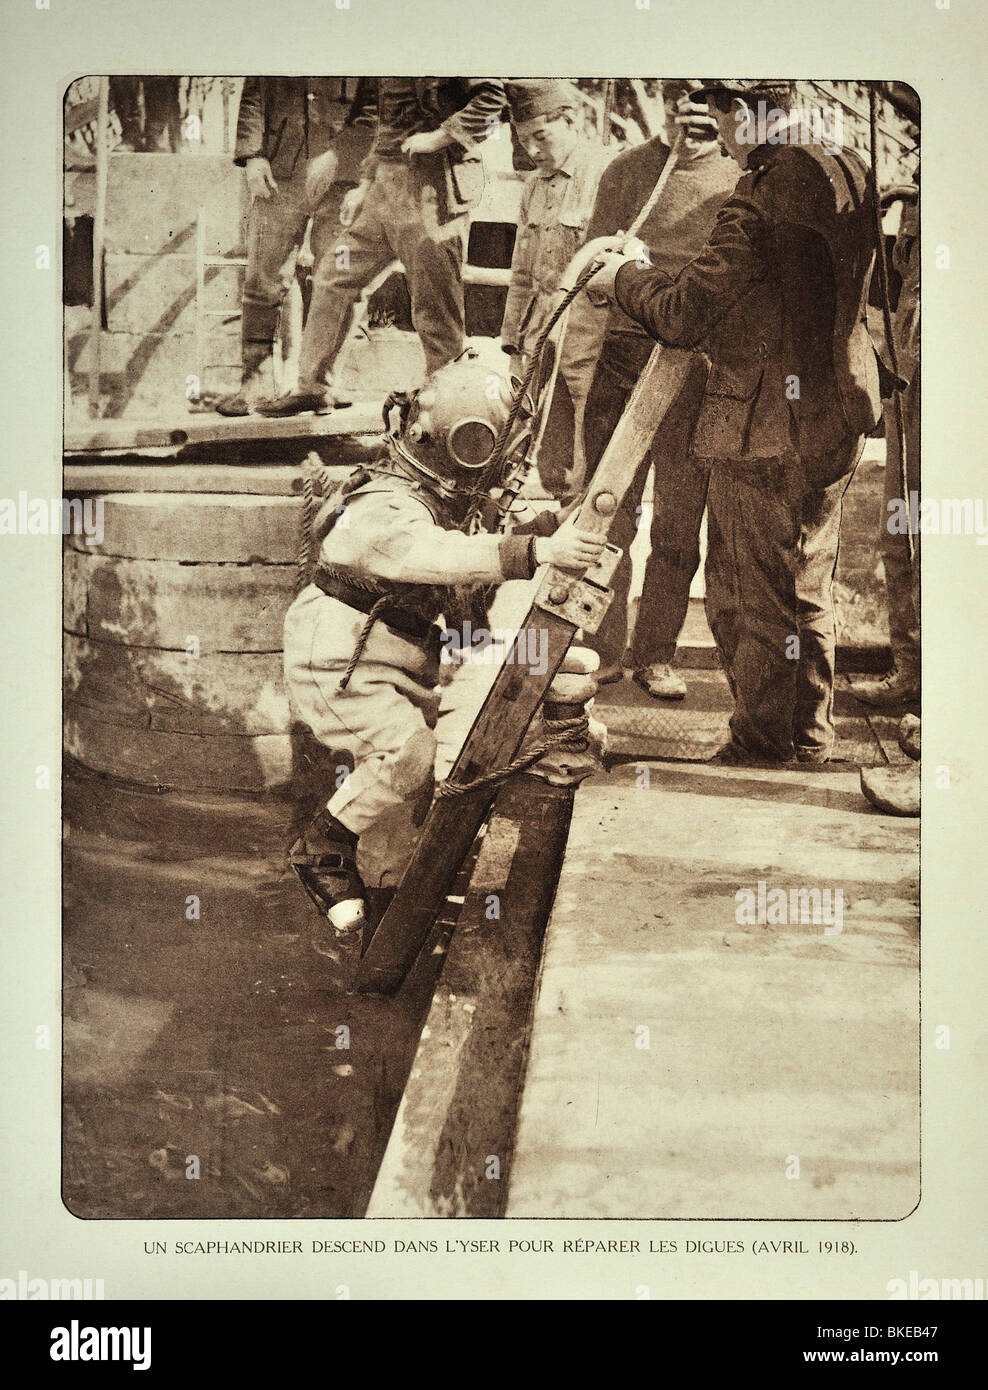 WWI diver wearing helmet descends ladder to repair dike along river Yser / IJzer in Flanders during First World War One, Belgium Stock Photo